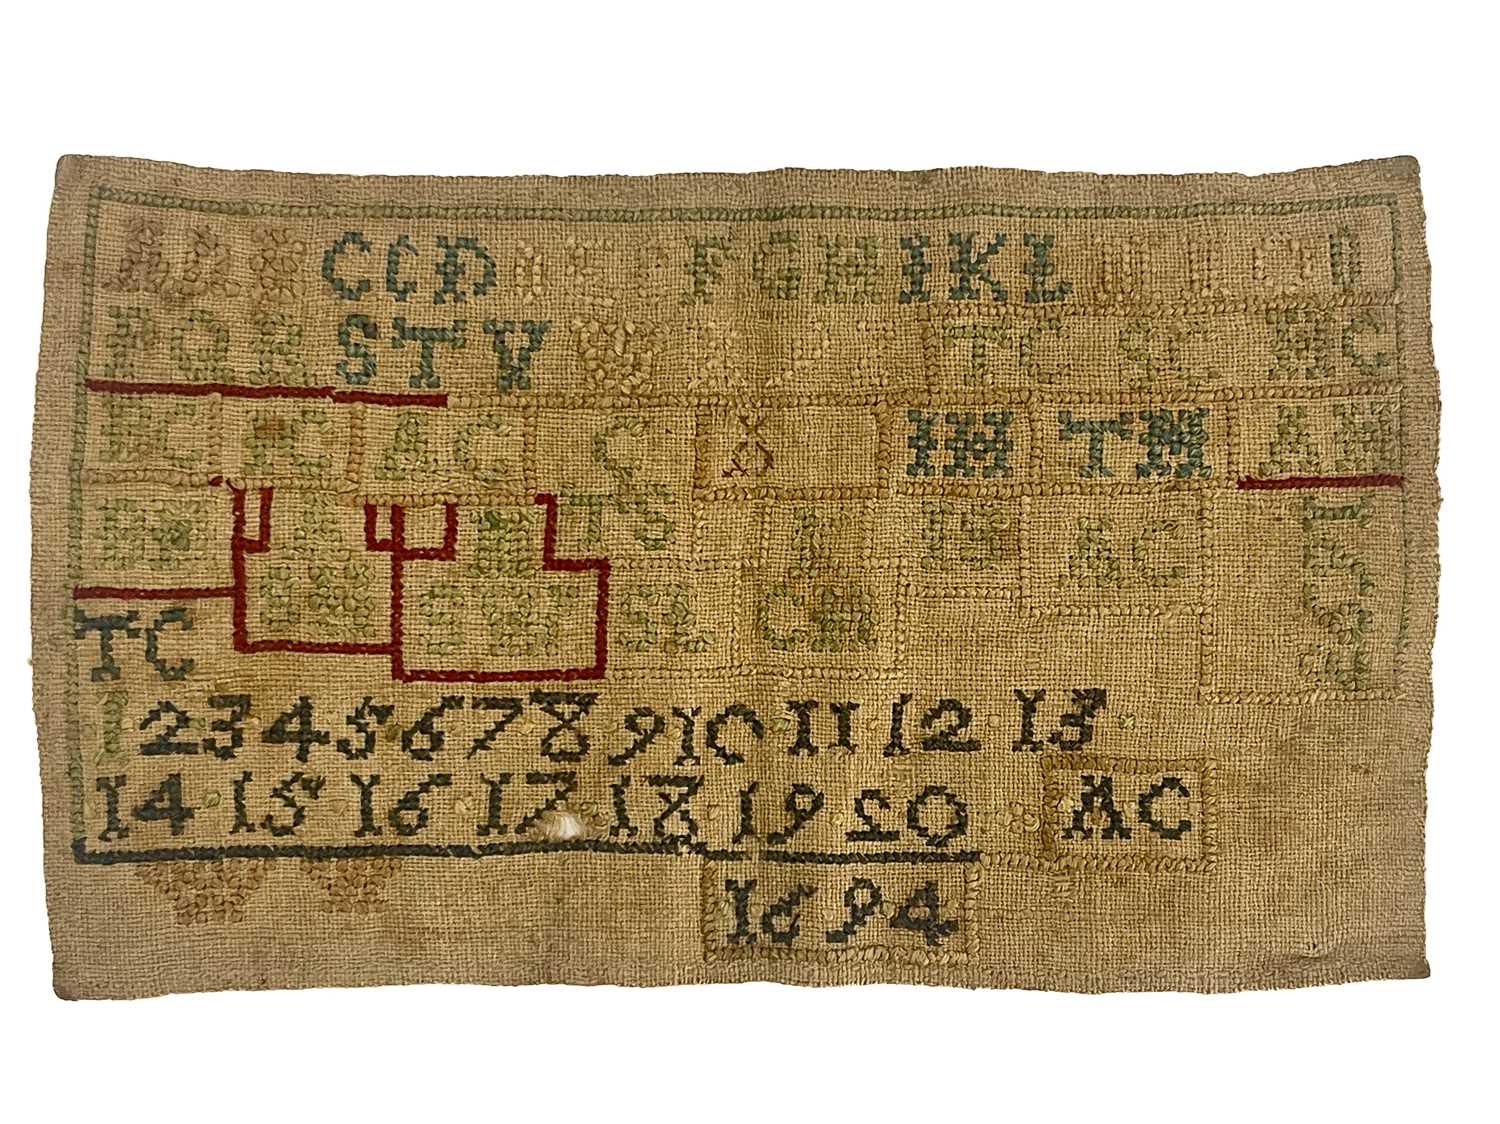 A 17th century William and Mary sampler, dated 1693 and 1694, embroidered in white, blue, green, red